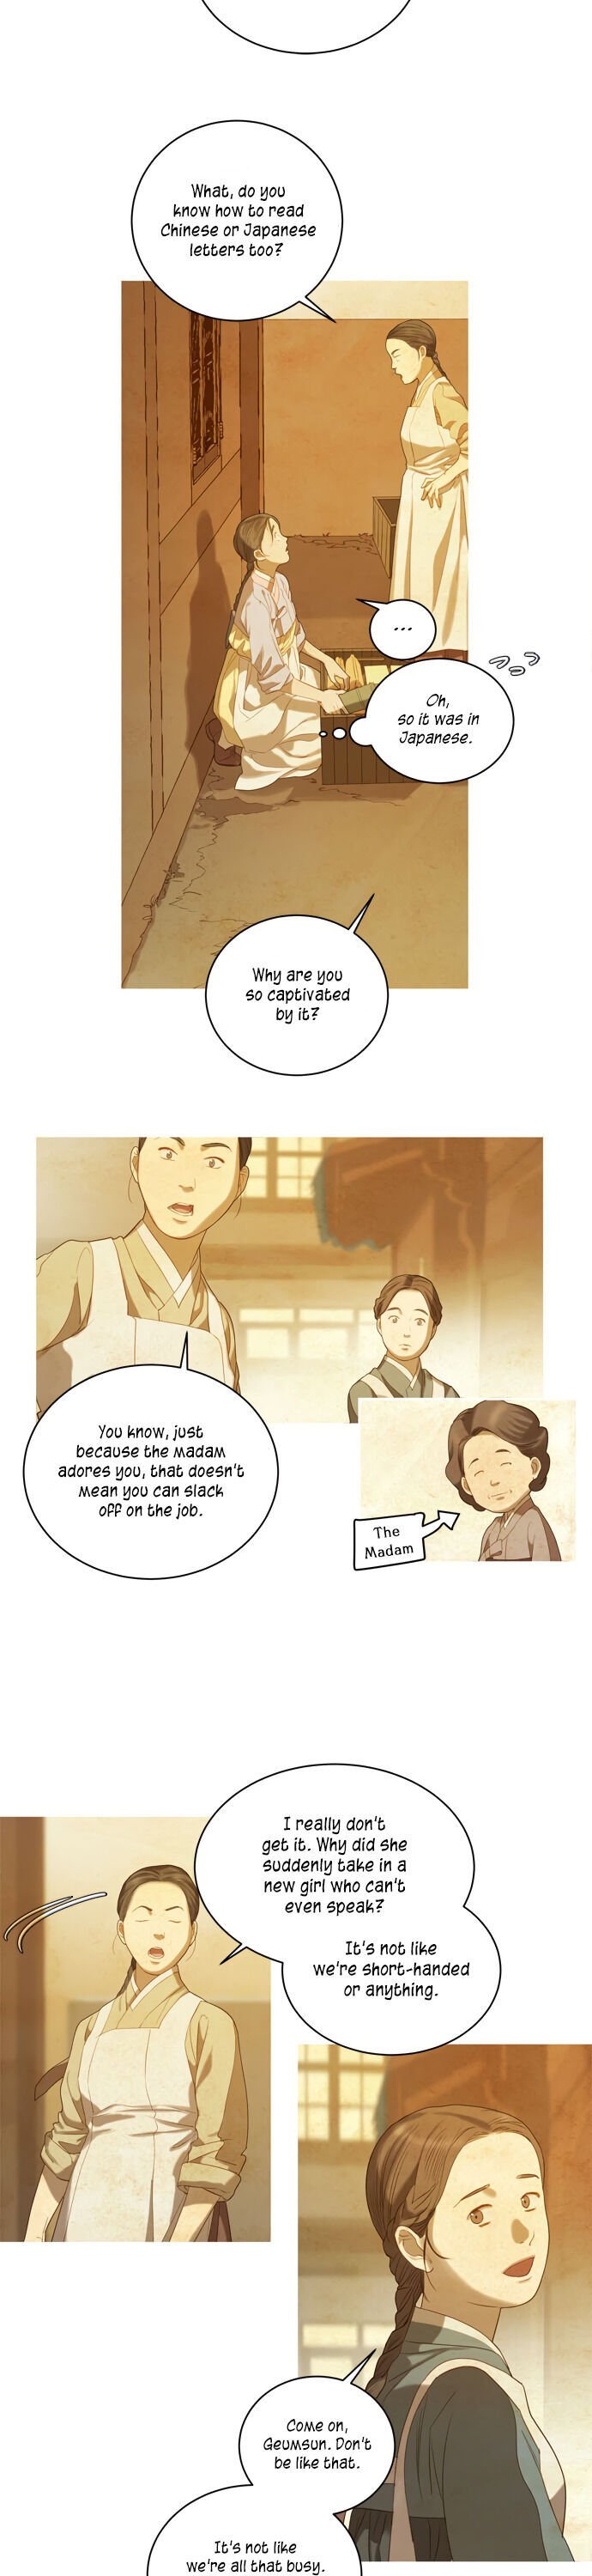 Gorae Byul - The Gyeongseong Mermaid - Chapter 32 Page 9